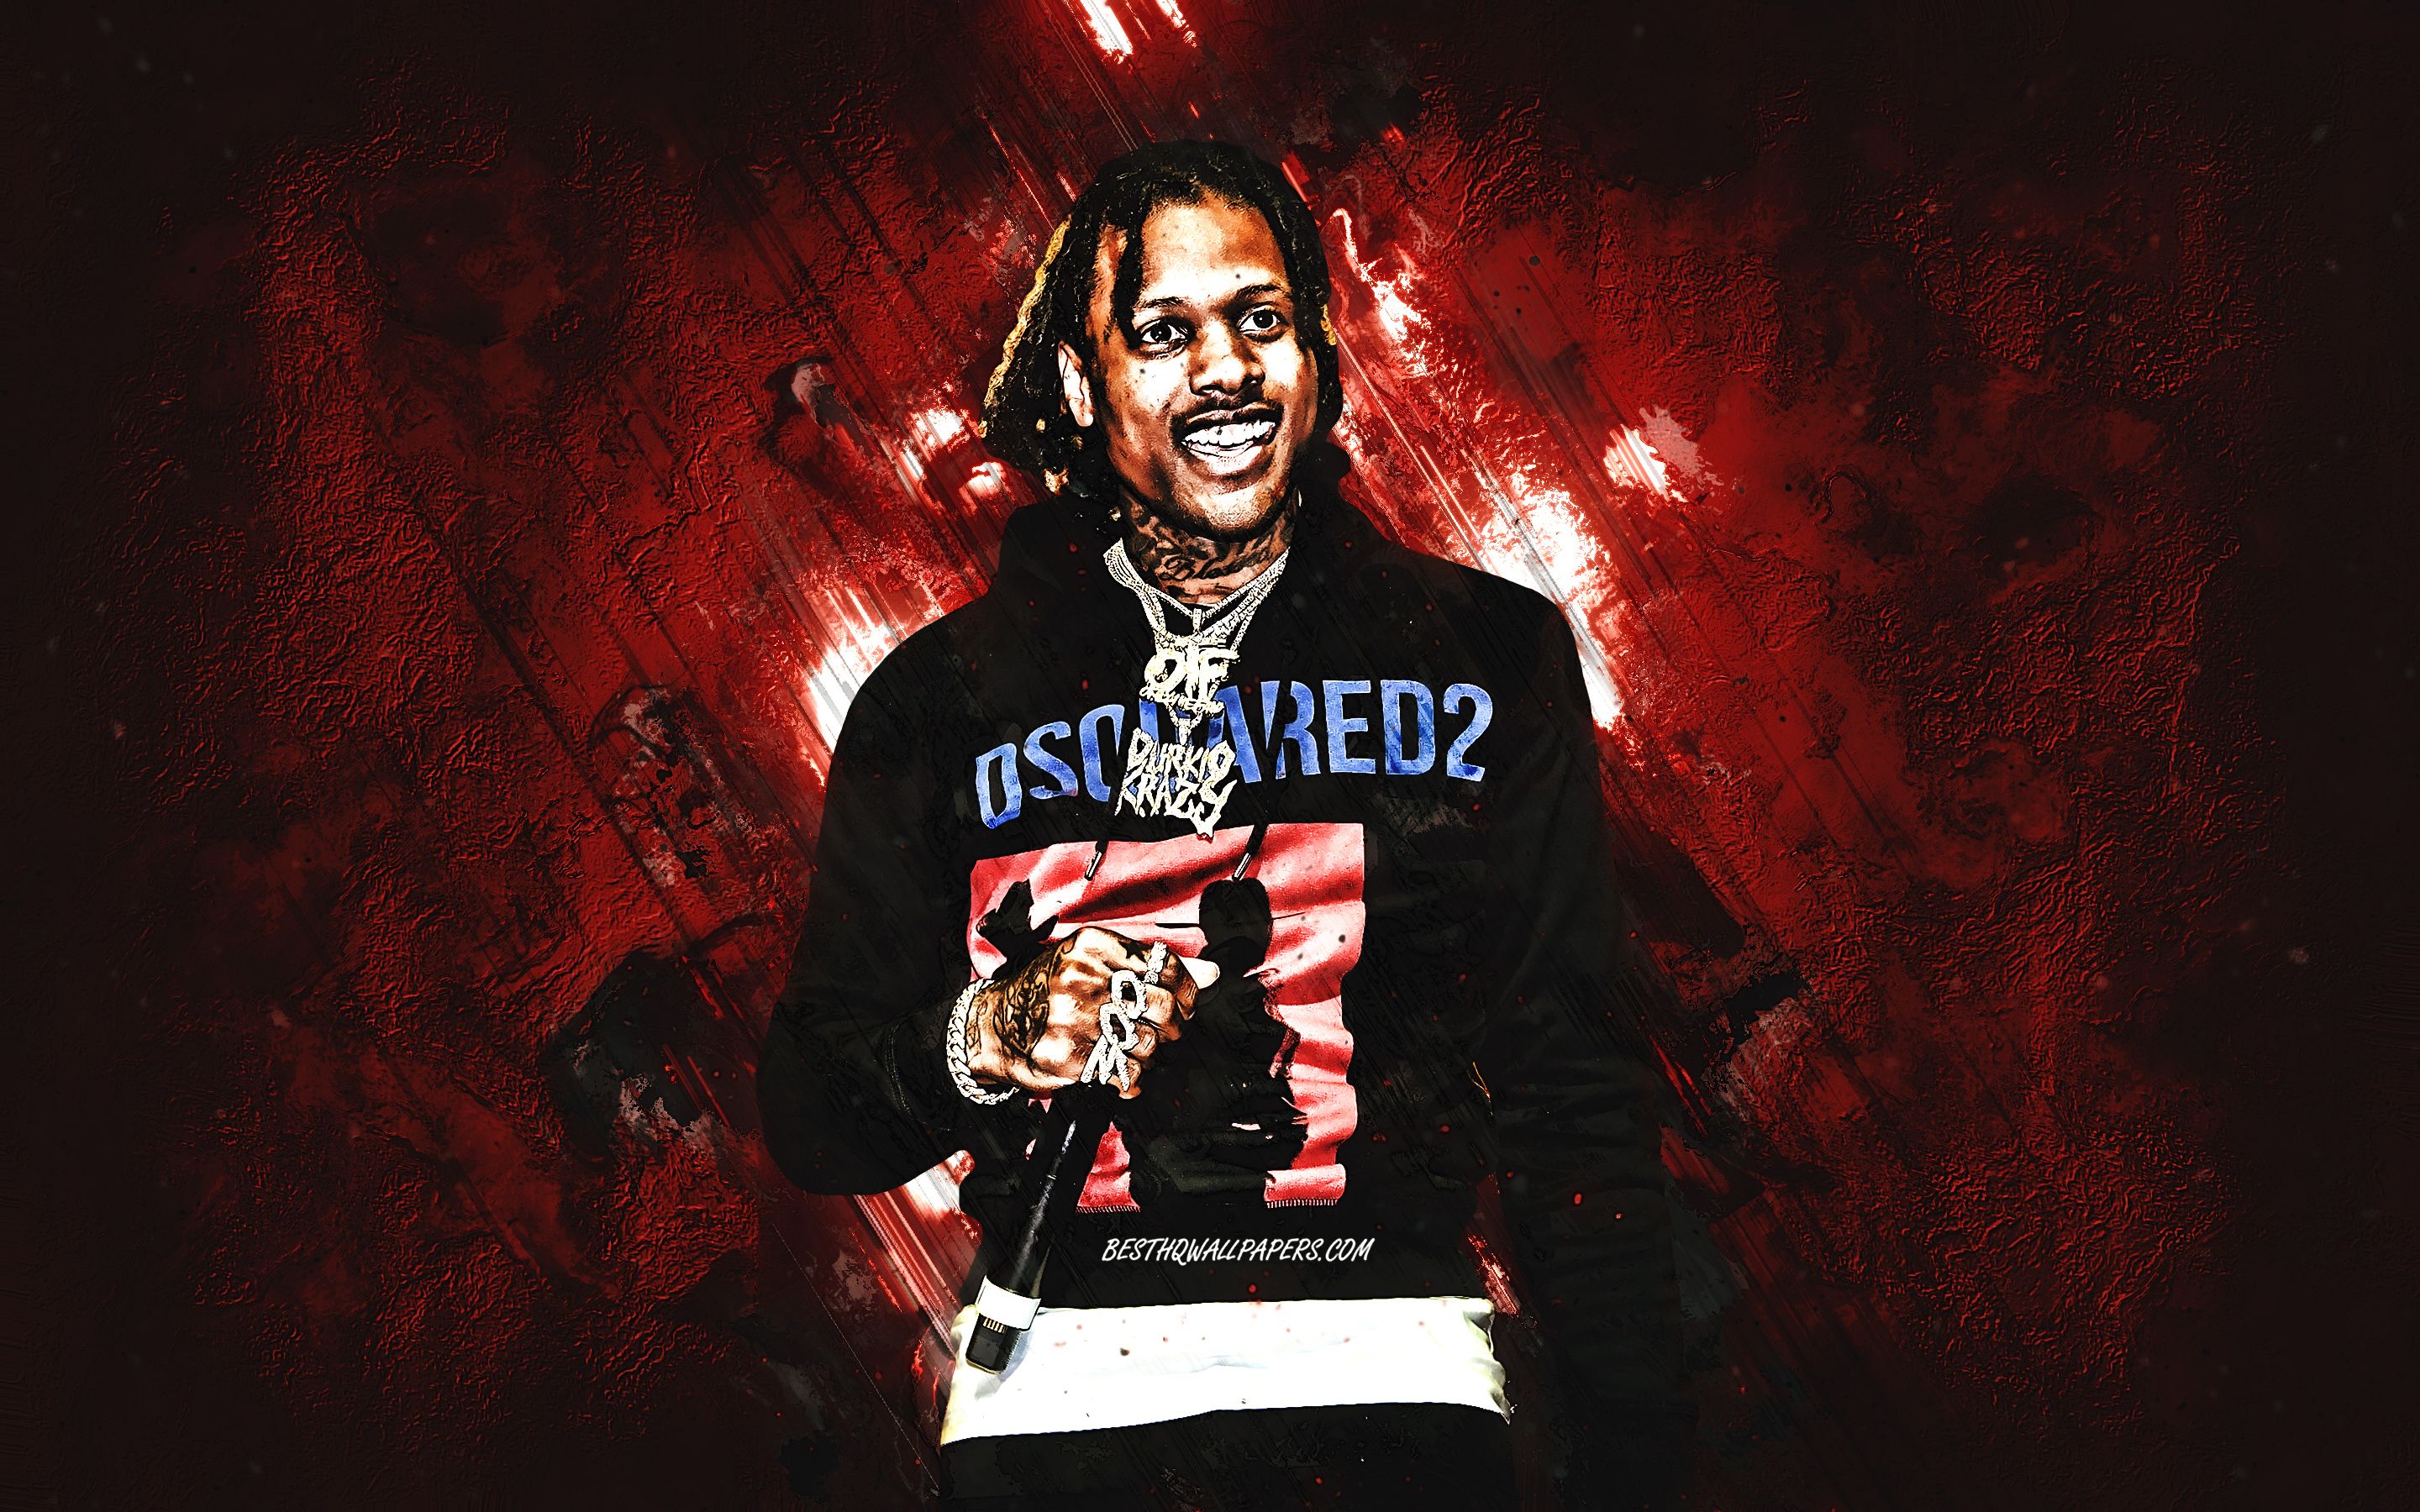 Download wallpaper Lil Durk, American rapper, portrait, red stone background, creative art for desktop with resolution 2880x1800. High Quality HD picture wallpaper